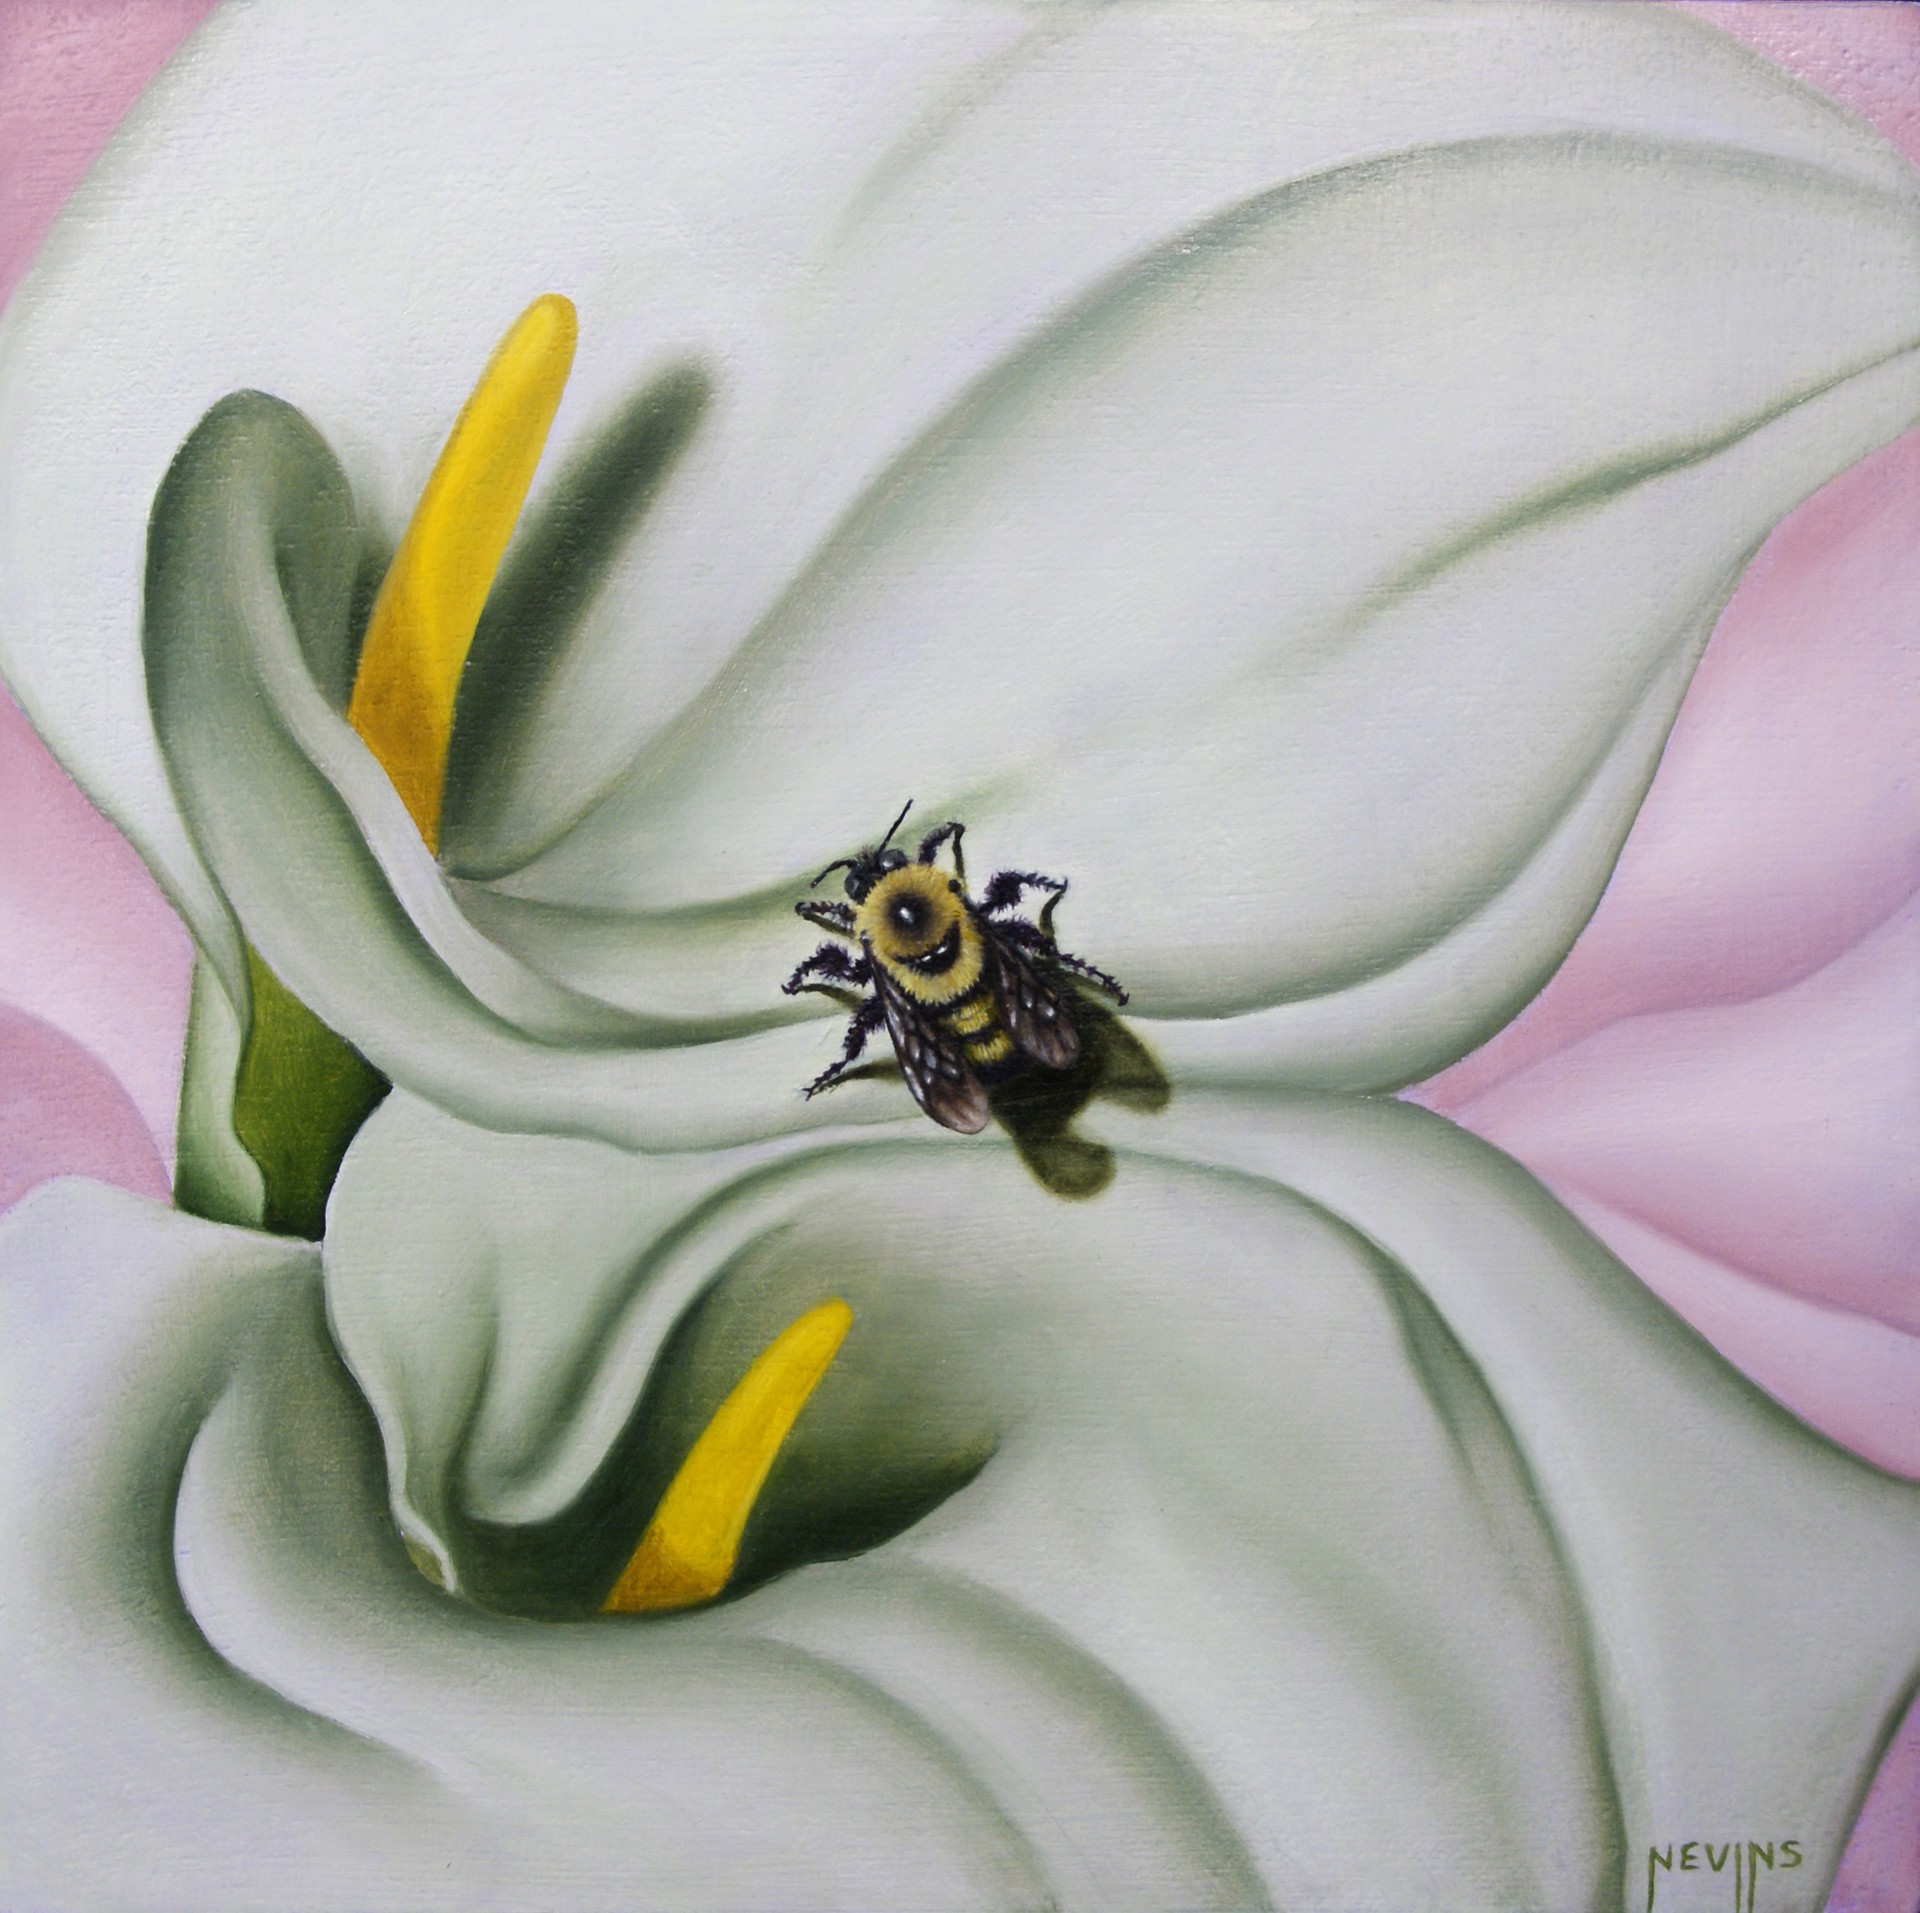 O'Keeffe's Nectar by Patrick Nevins